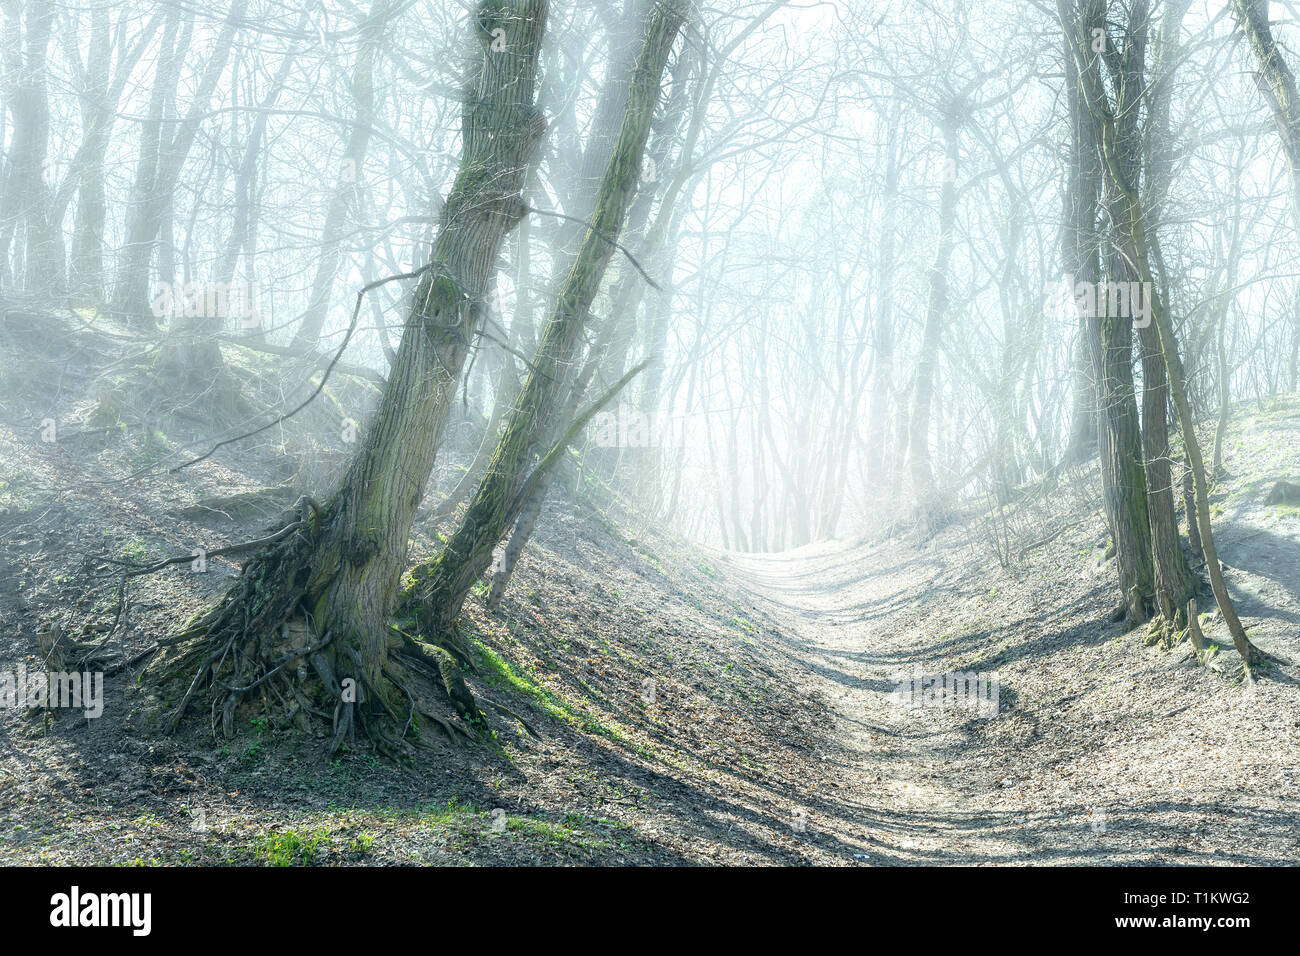 Path In Mysterious Foggy Forest Hills Road Through Old Crooked Trees In Dense Mist Scary Forest Stock Photo Alamy